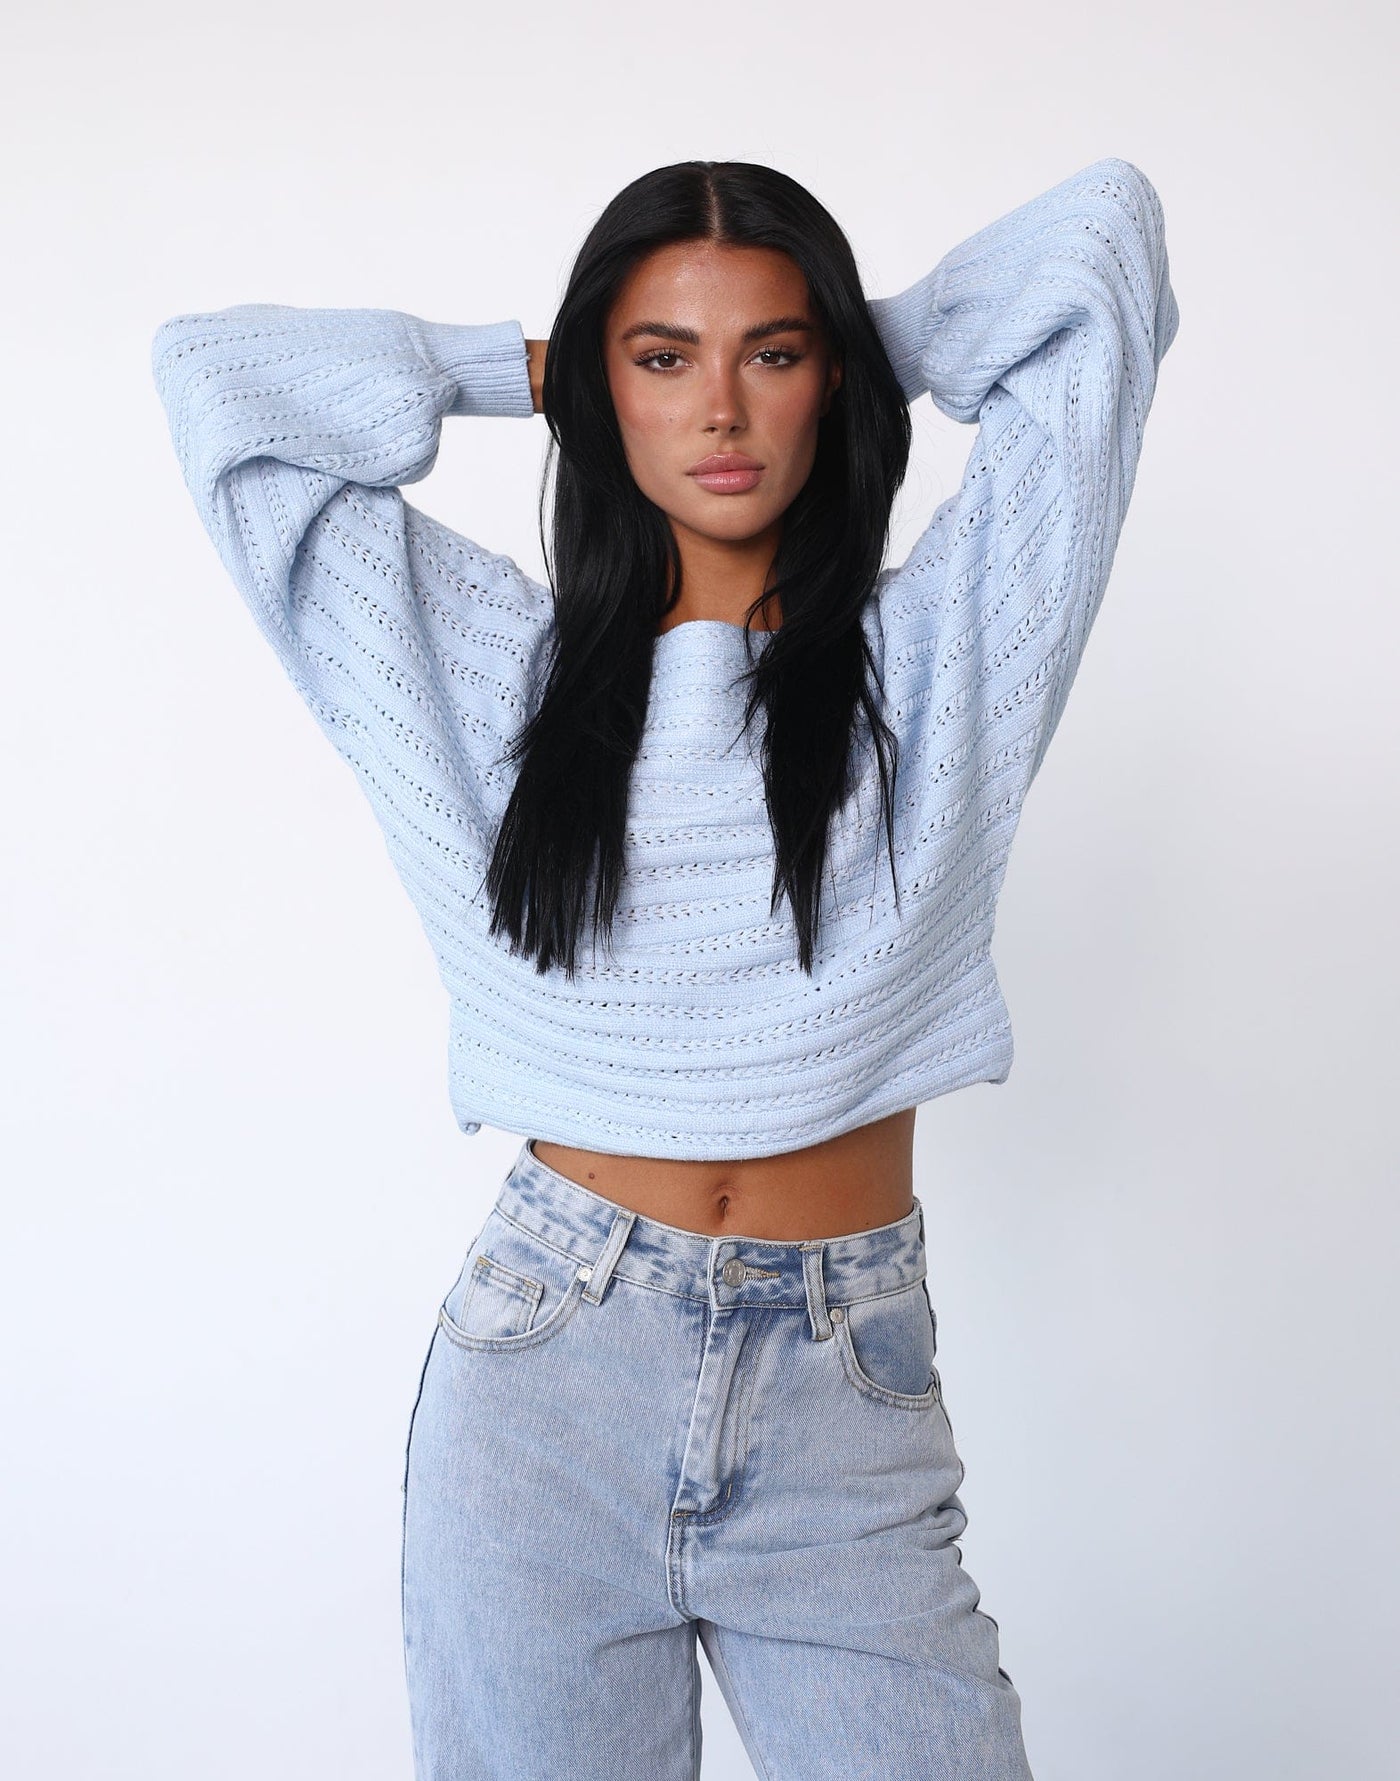 Sonia Long Sleeve Knit Top (Light Blue) - Boatneck Long Sleeve Loose Knit Top - Women's Top - Charcoal Clothing